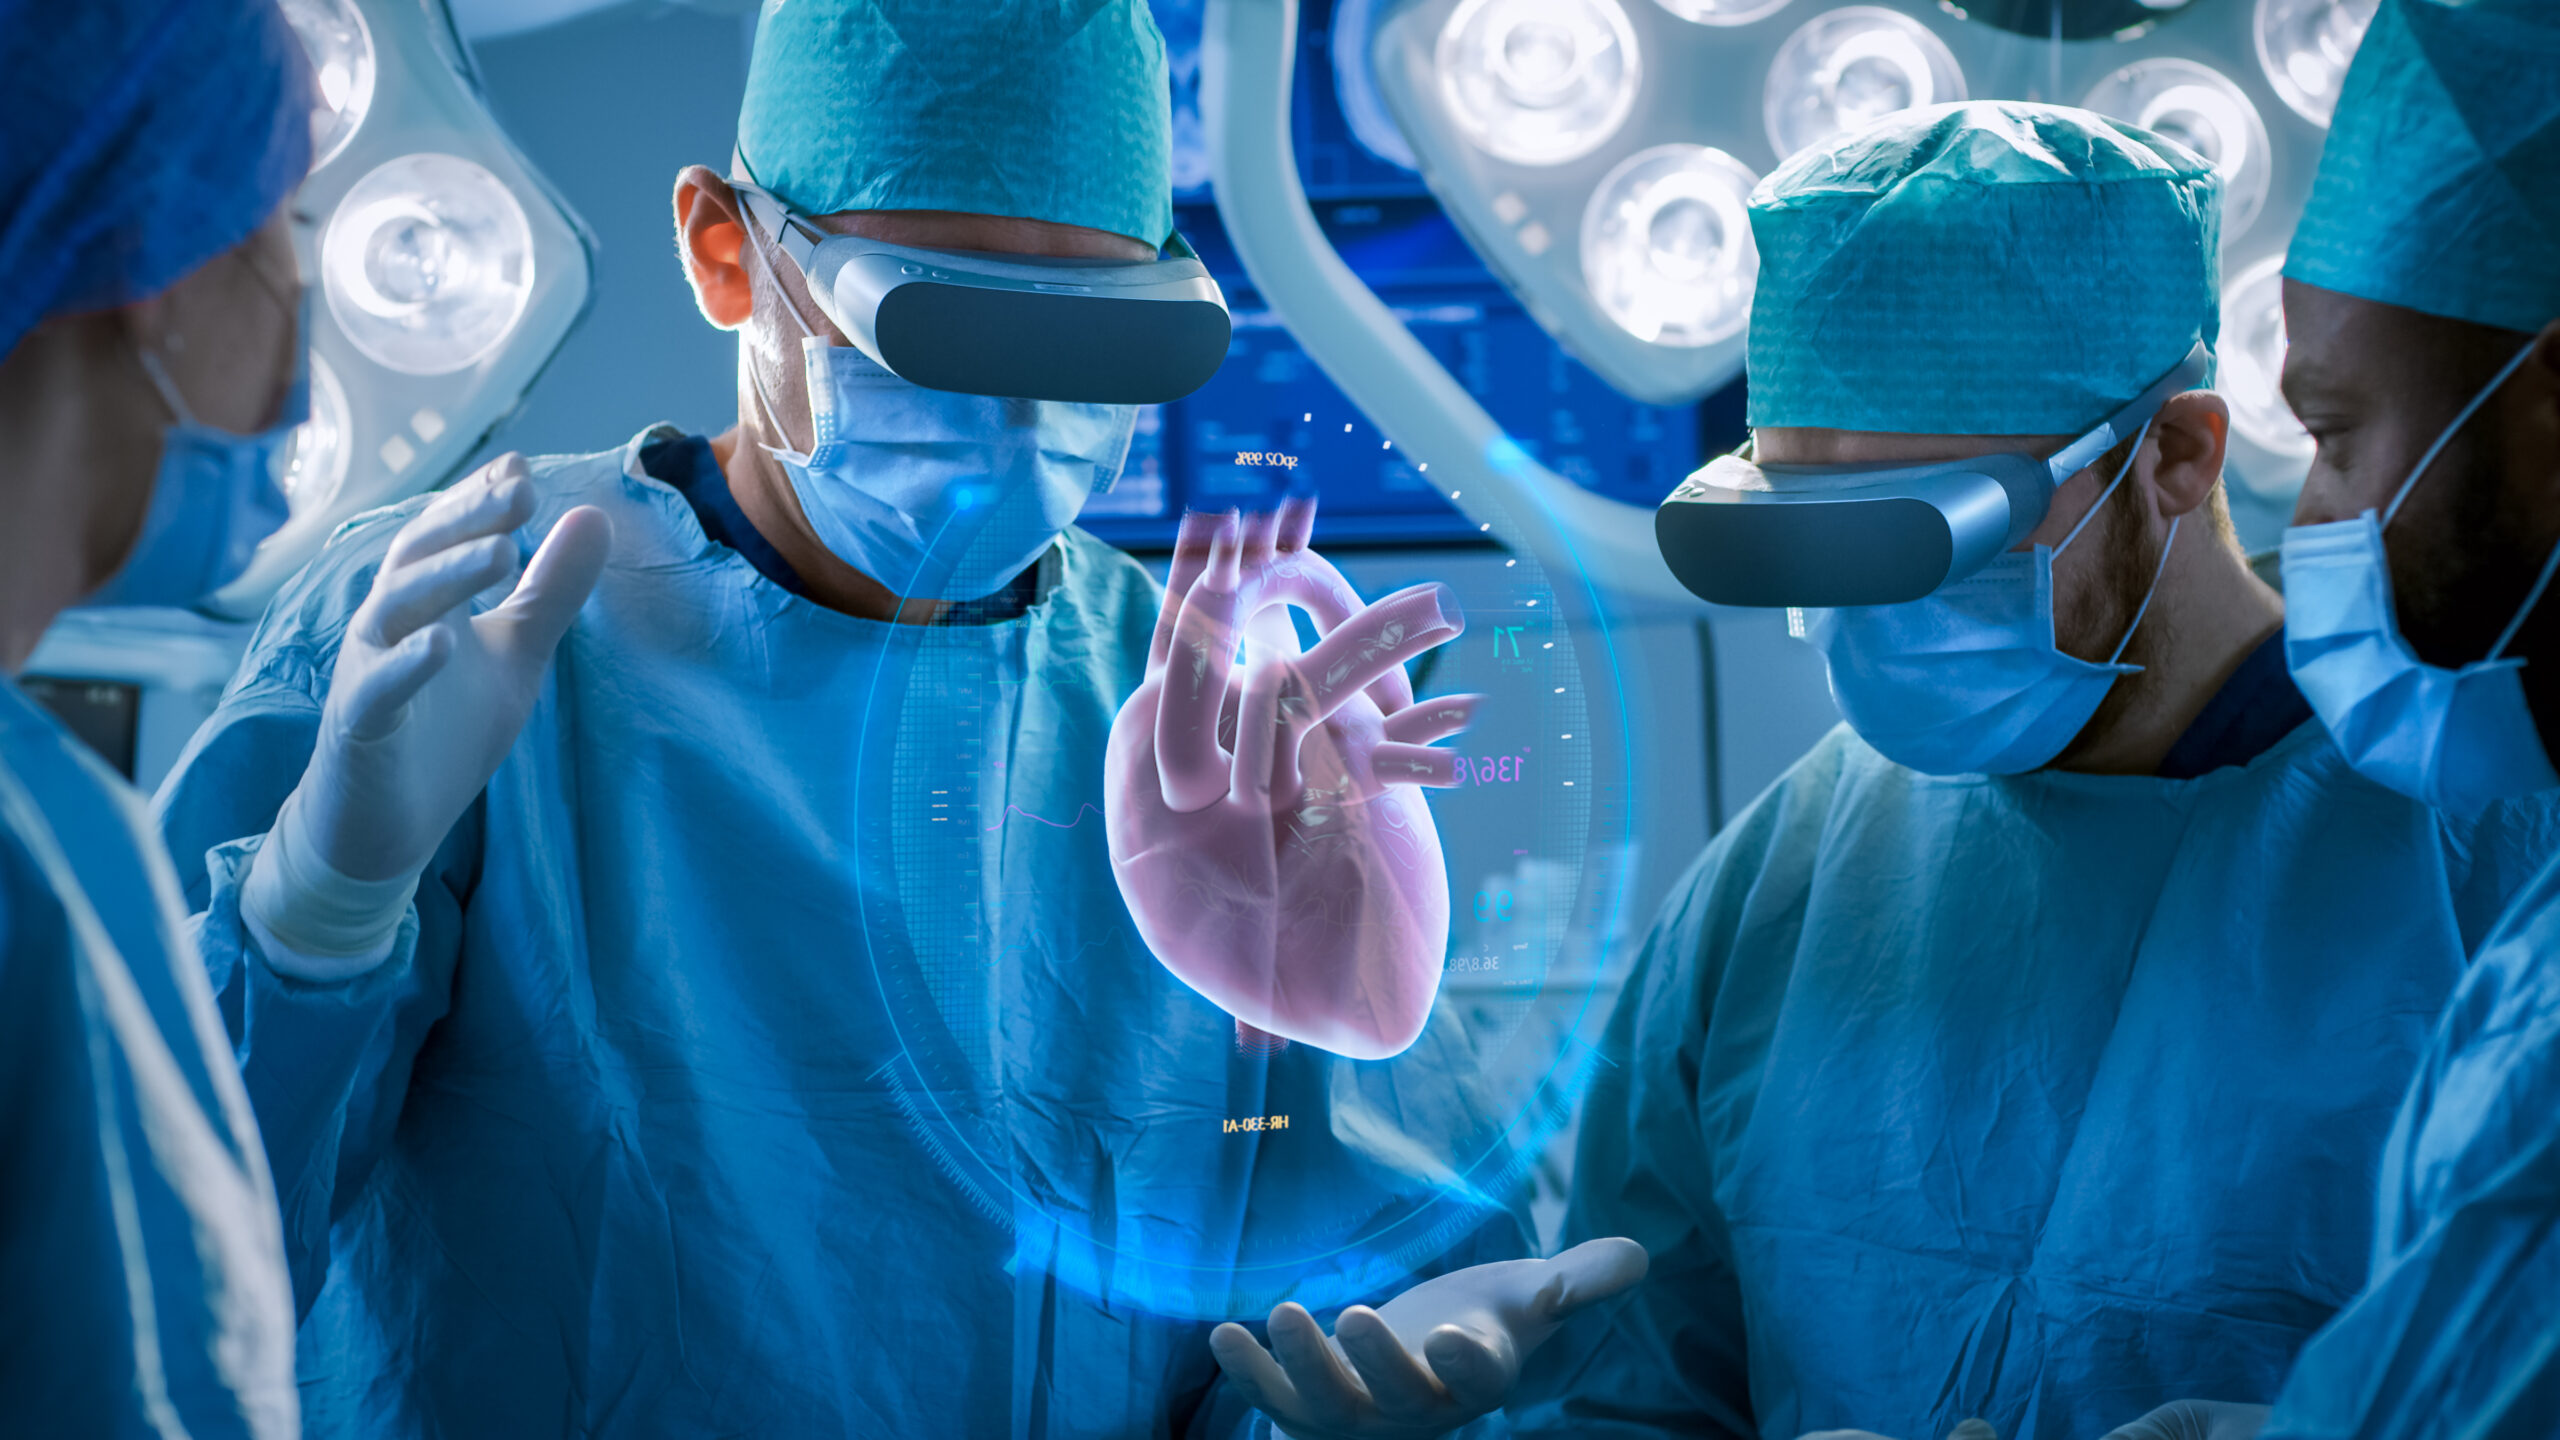 Healthcare professionals view heart surgery in Extended Reality (XR).